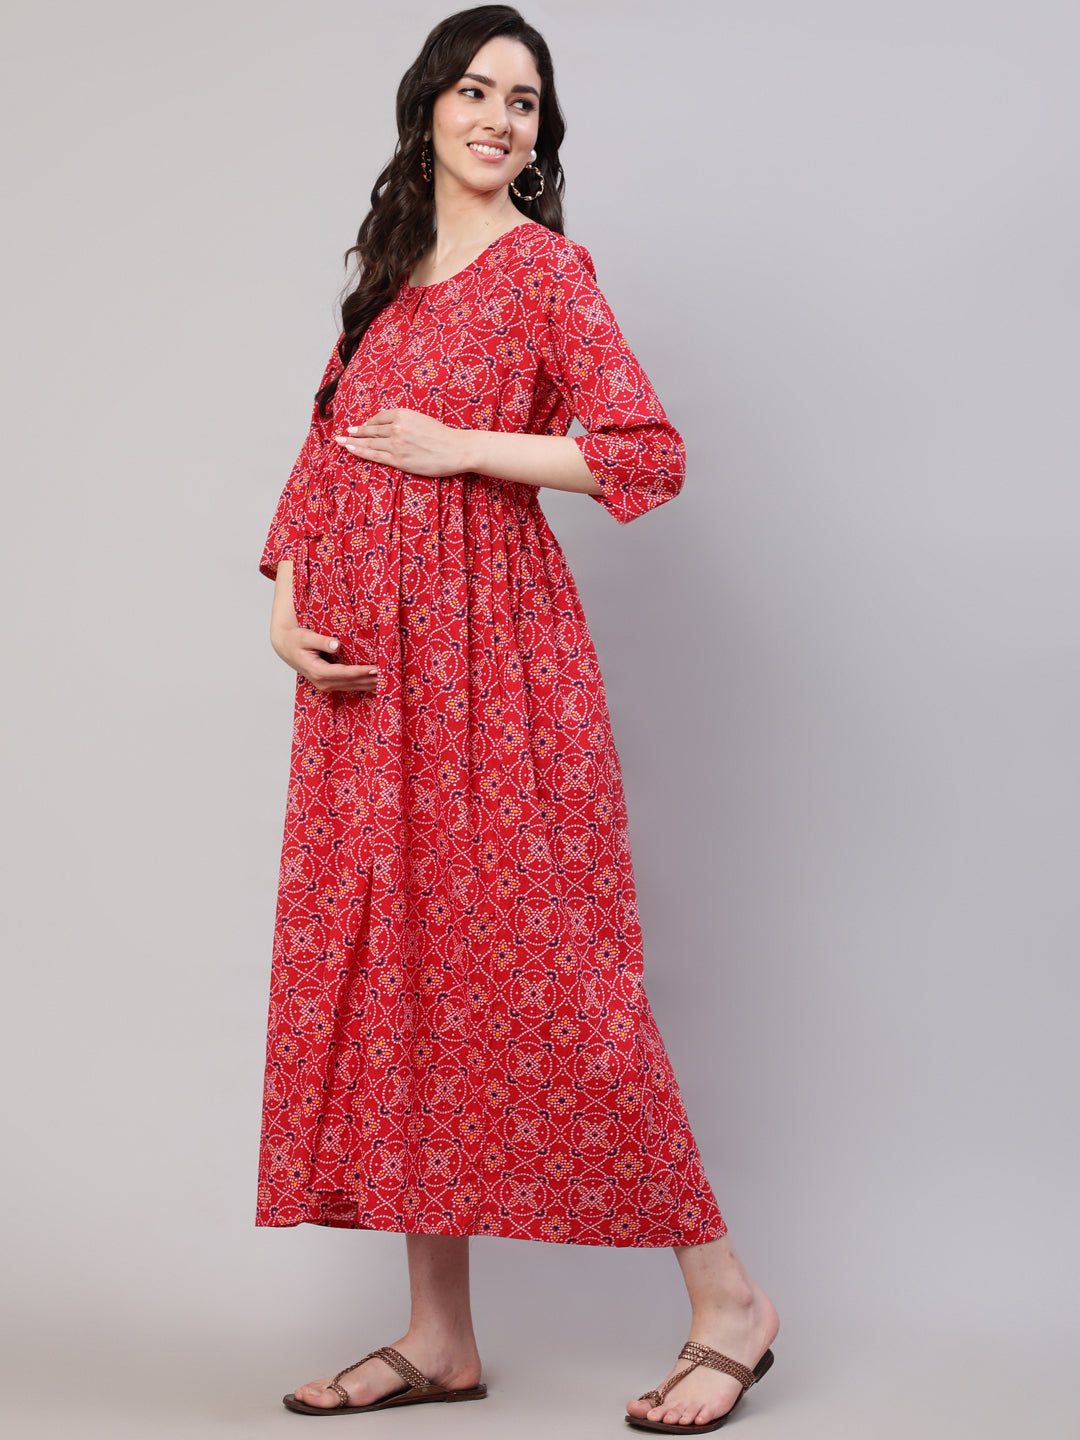 Women's Red Printed Flared Maternity Dress - Nayo Clothing